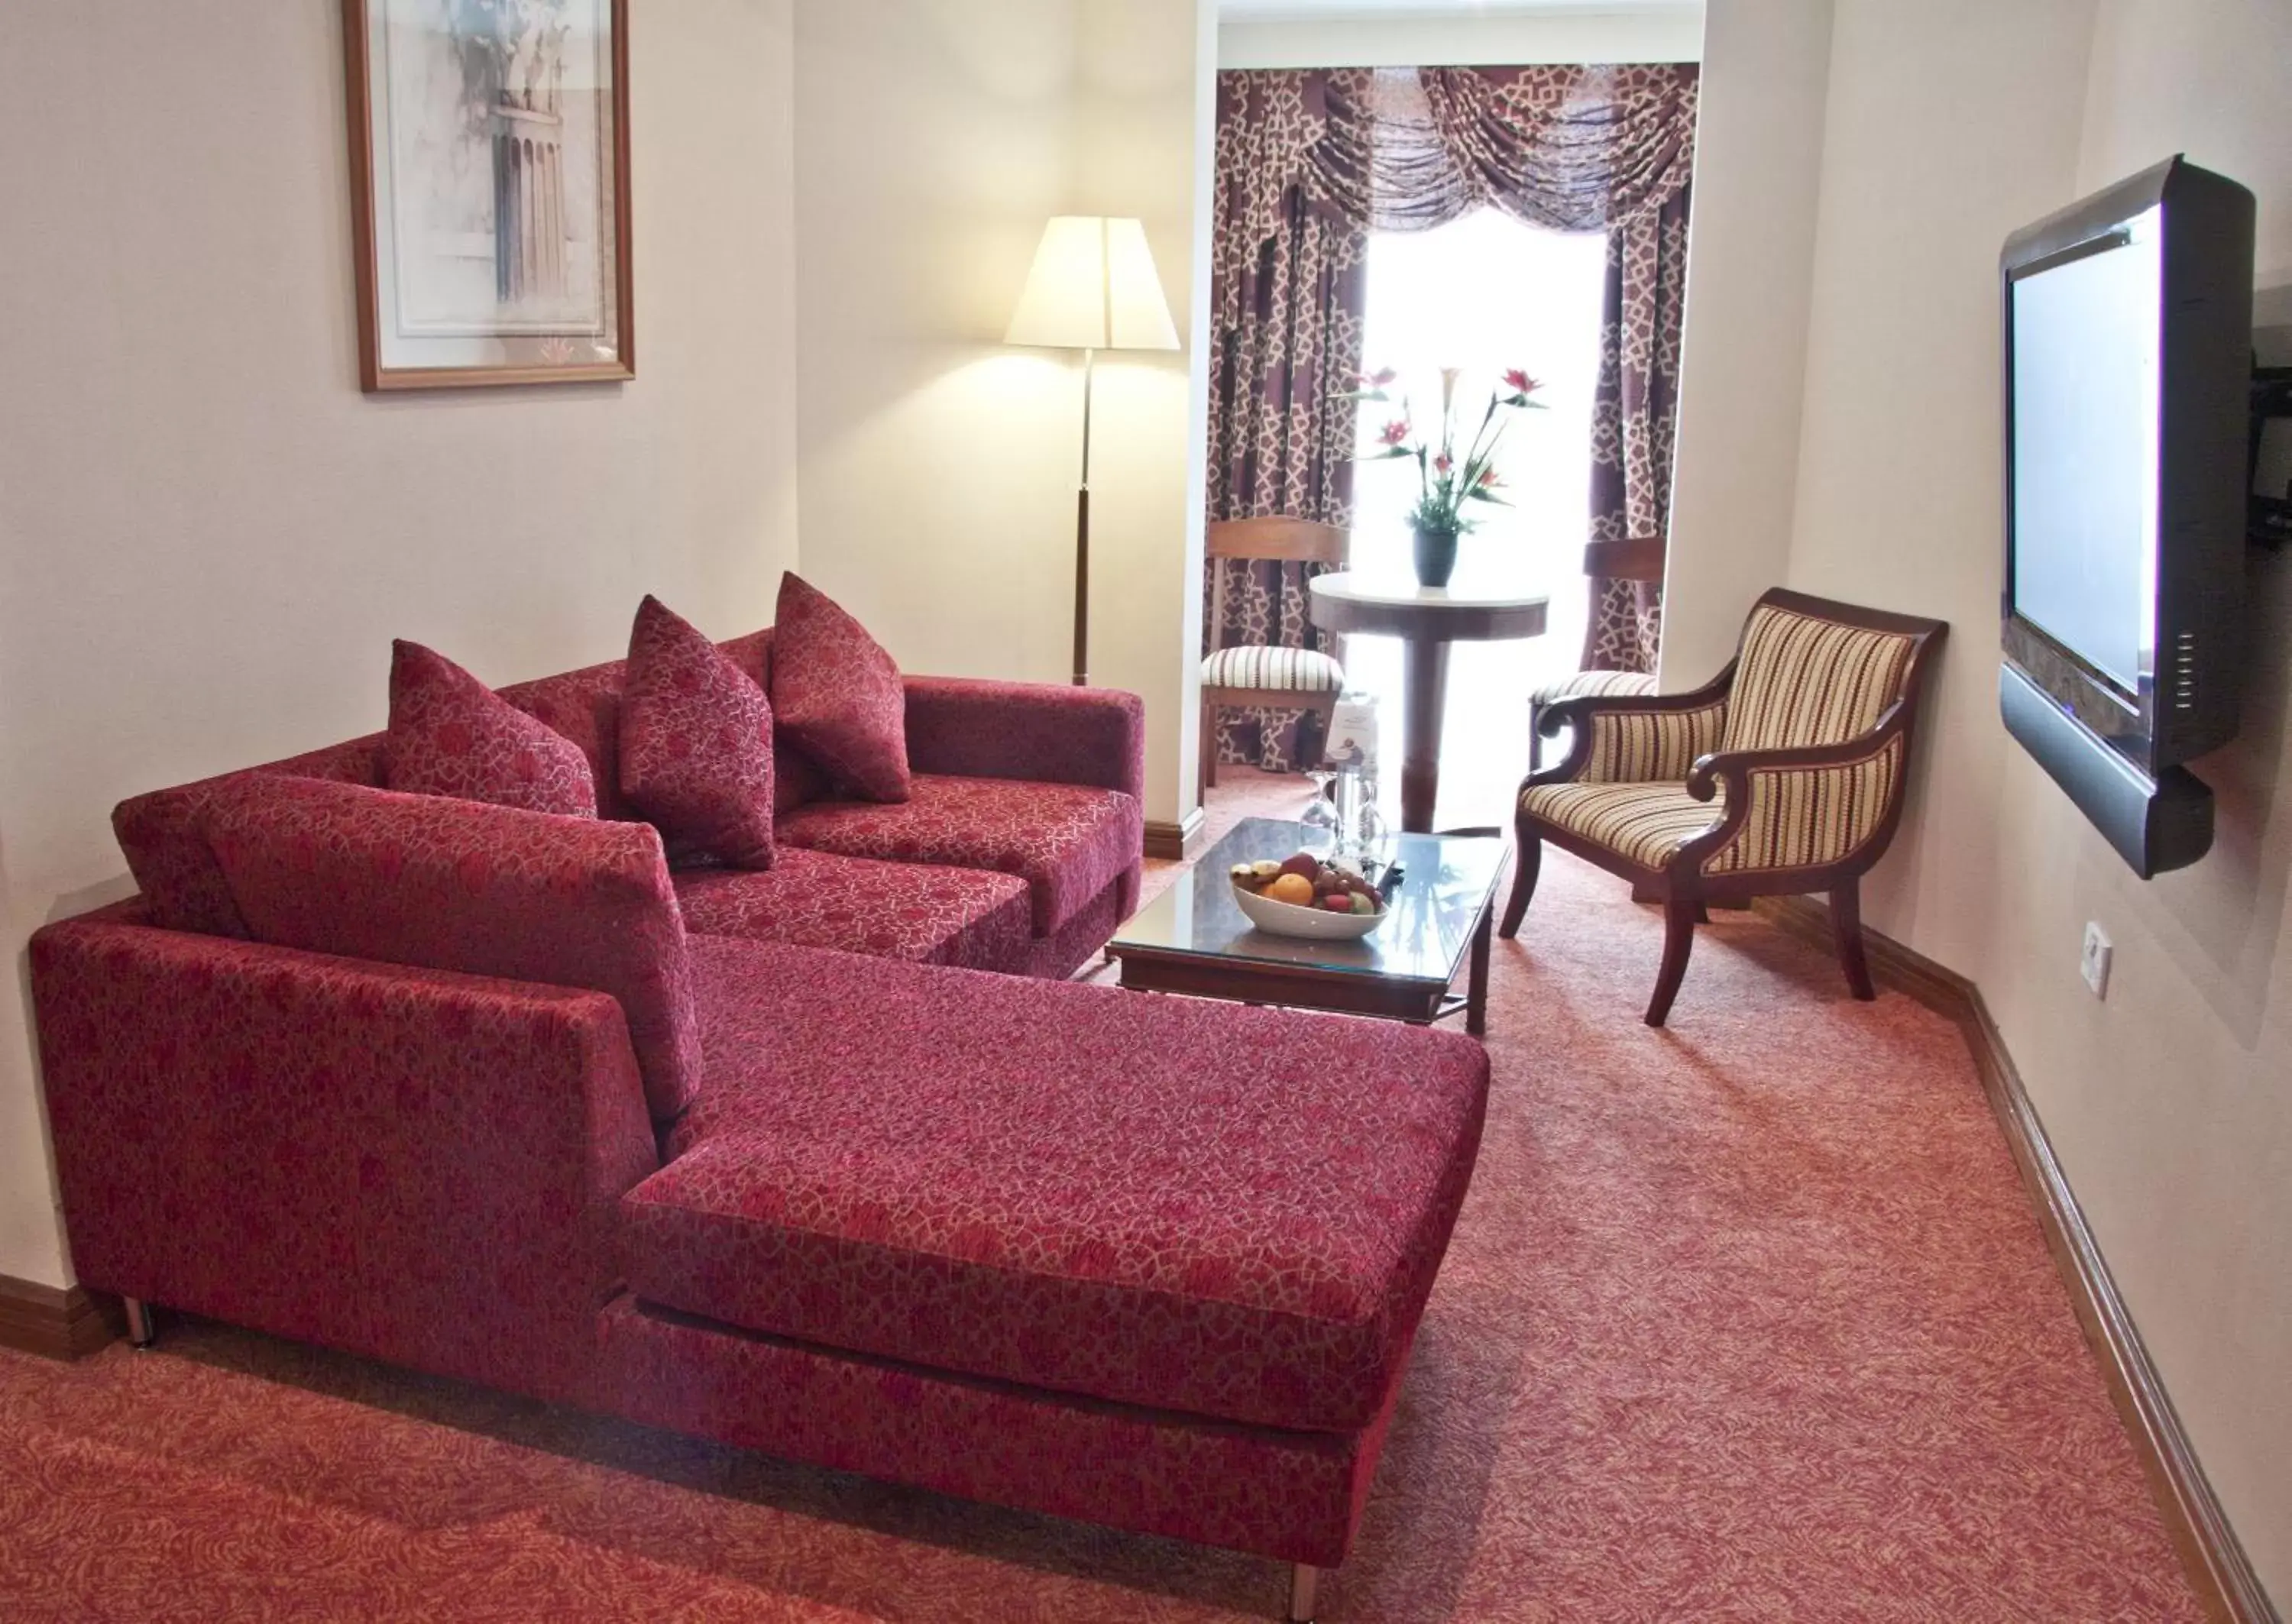 Executive Suite in Regent Palace Hotel